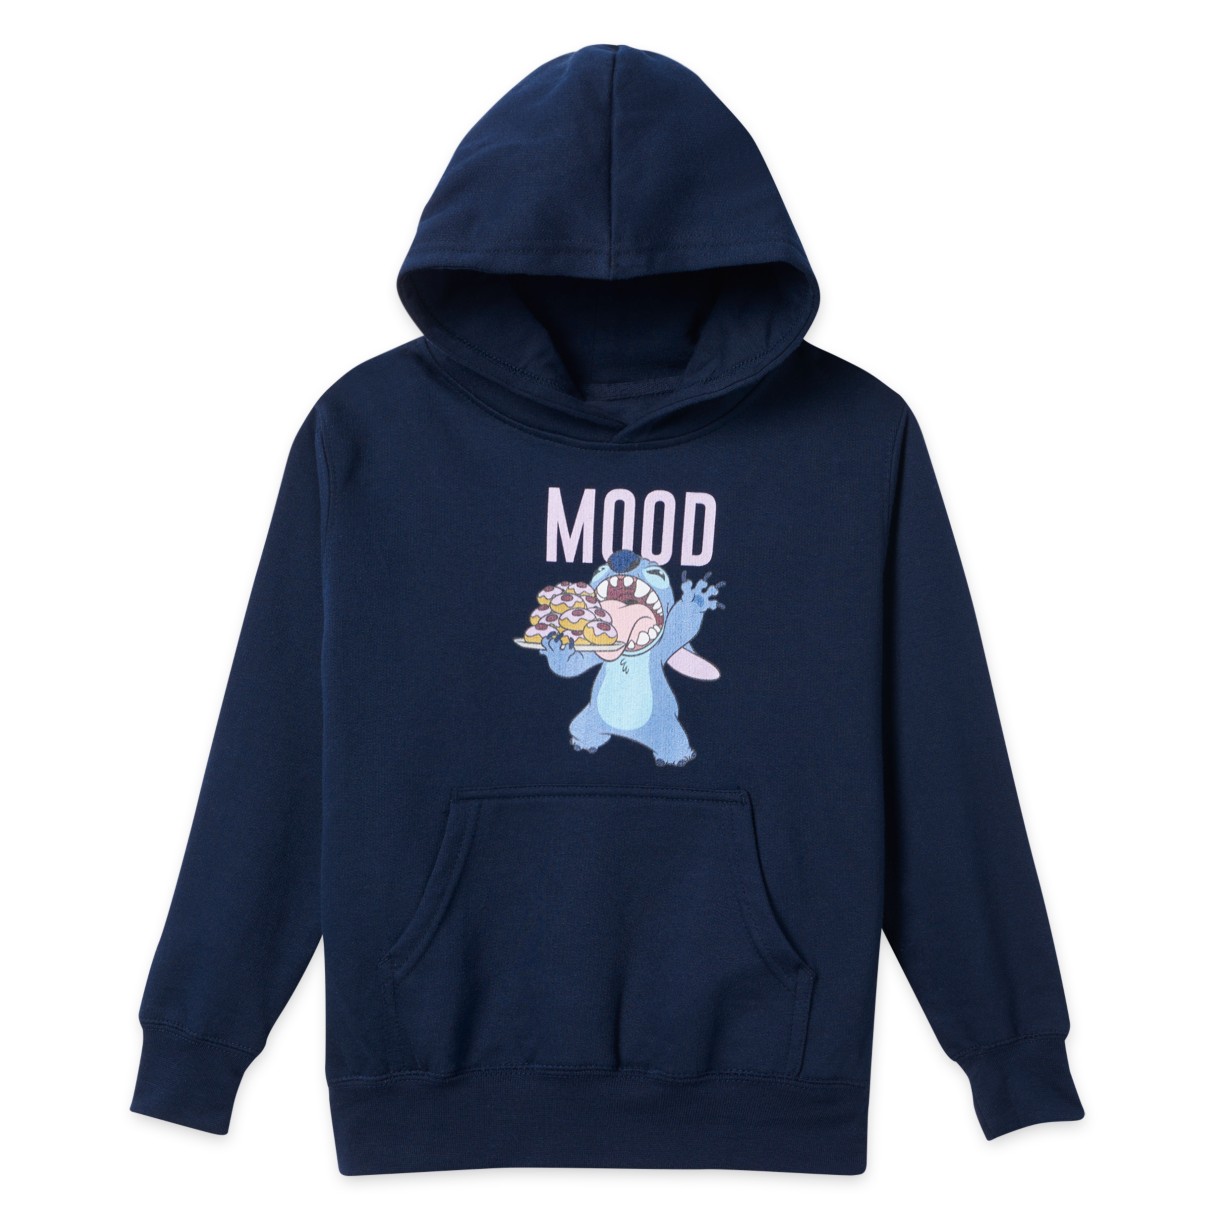 Stitch Hoodie: The Coolest and Funniest Pullover for Lilo & Stitch